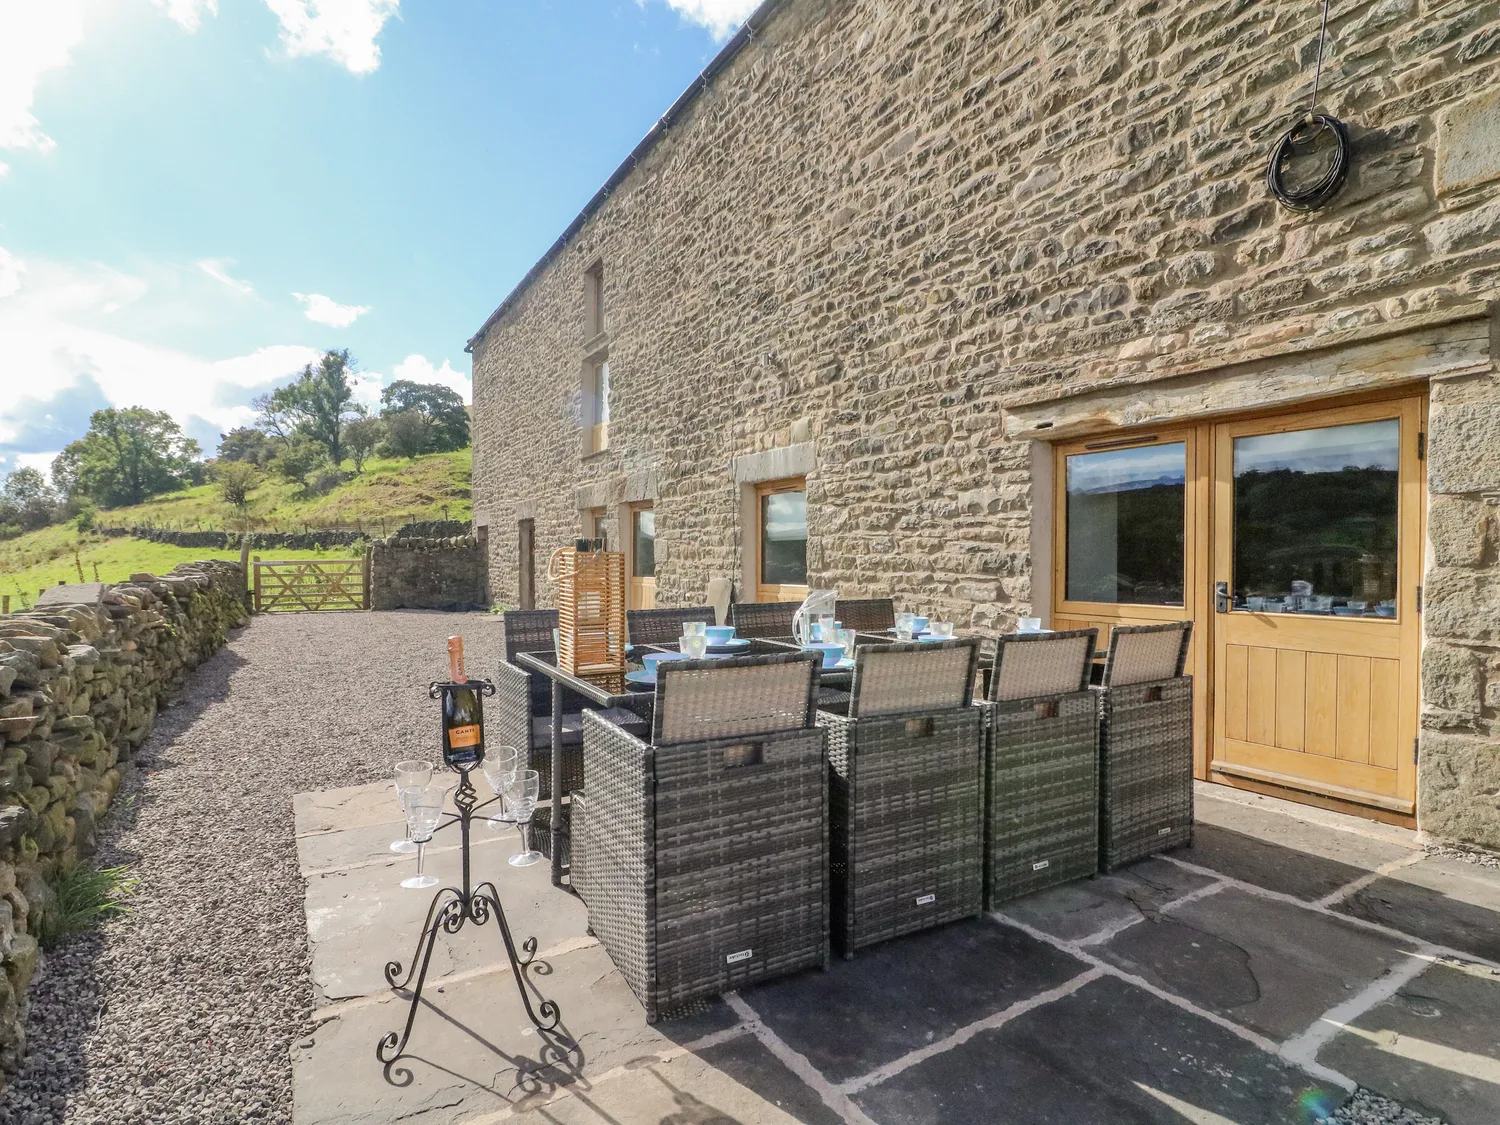 Image name hollow gill barn holiday cottage sedbergh cumbria the 2 image from the post Accommodation in Yorkshire.com.